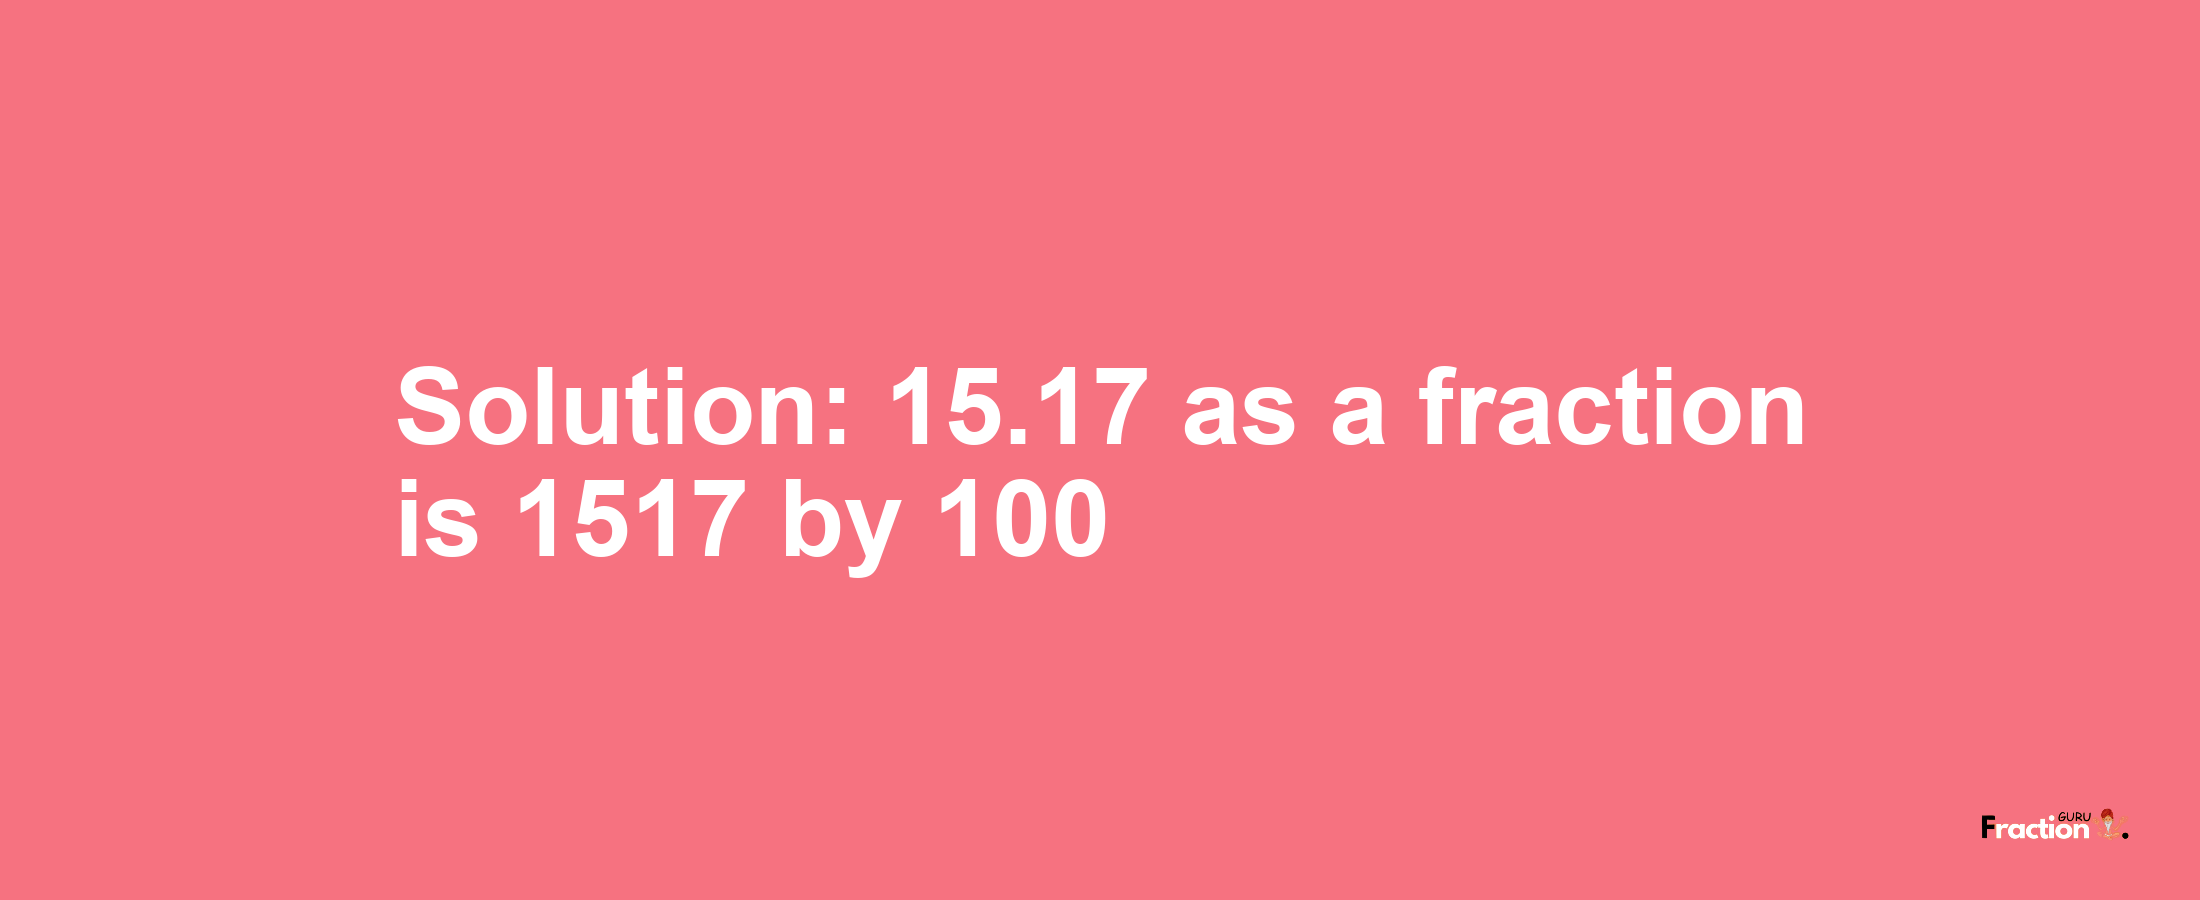 Solution:15.17 as a fraction is 1517/100